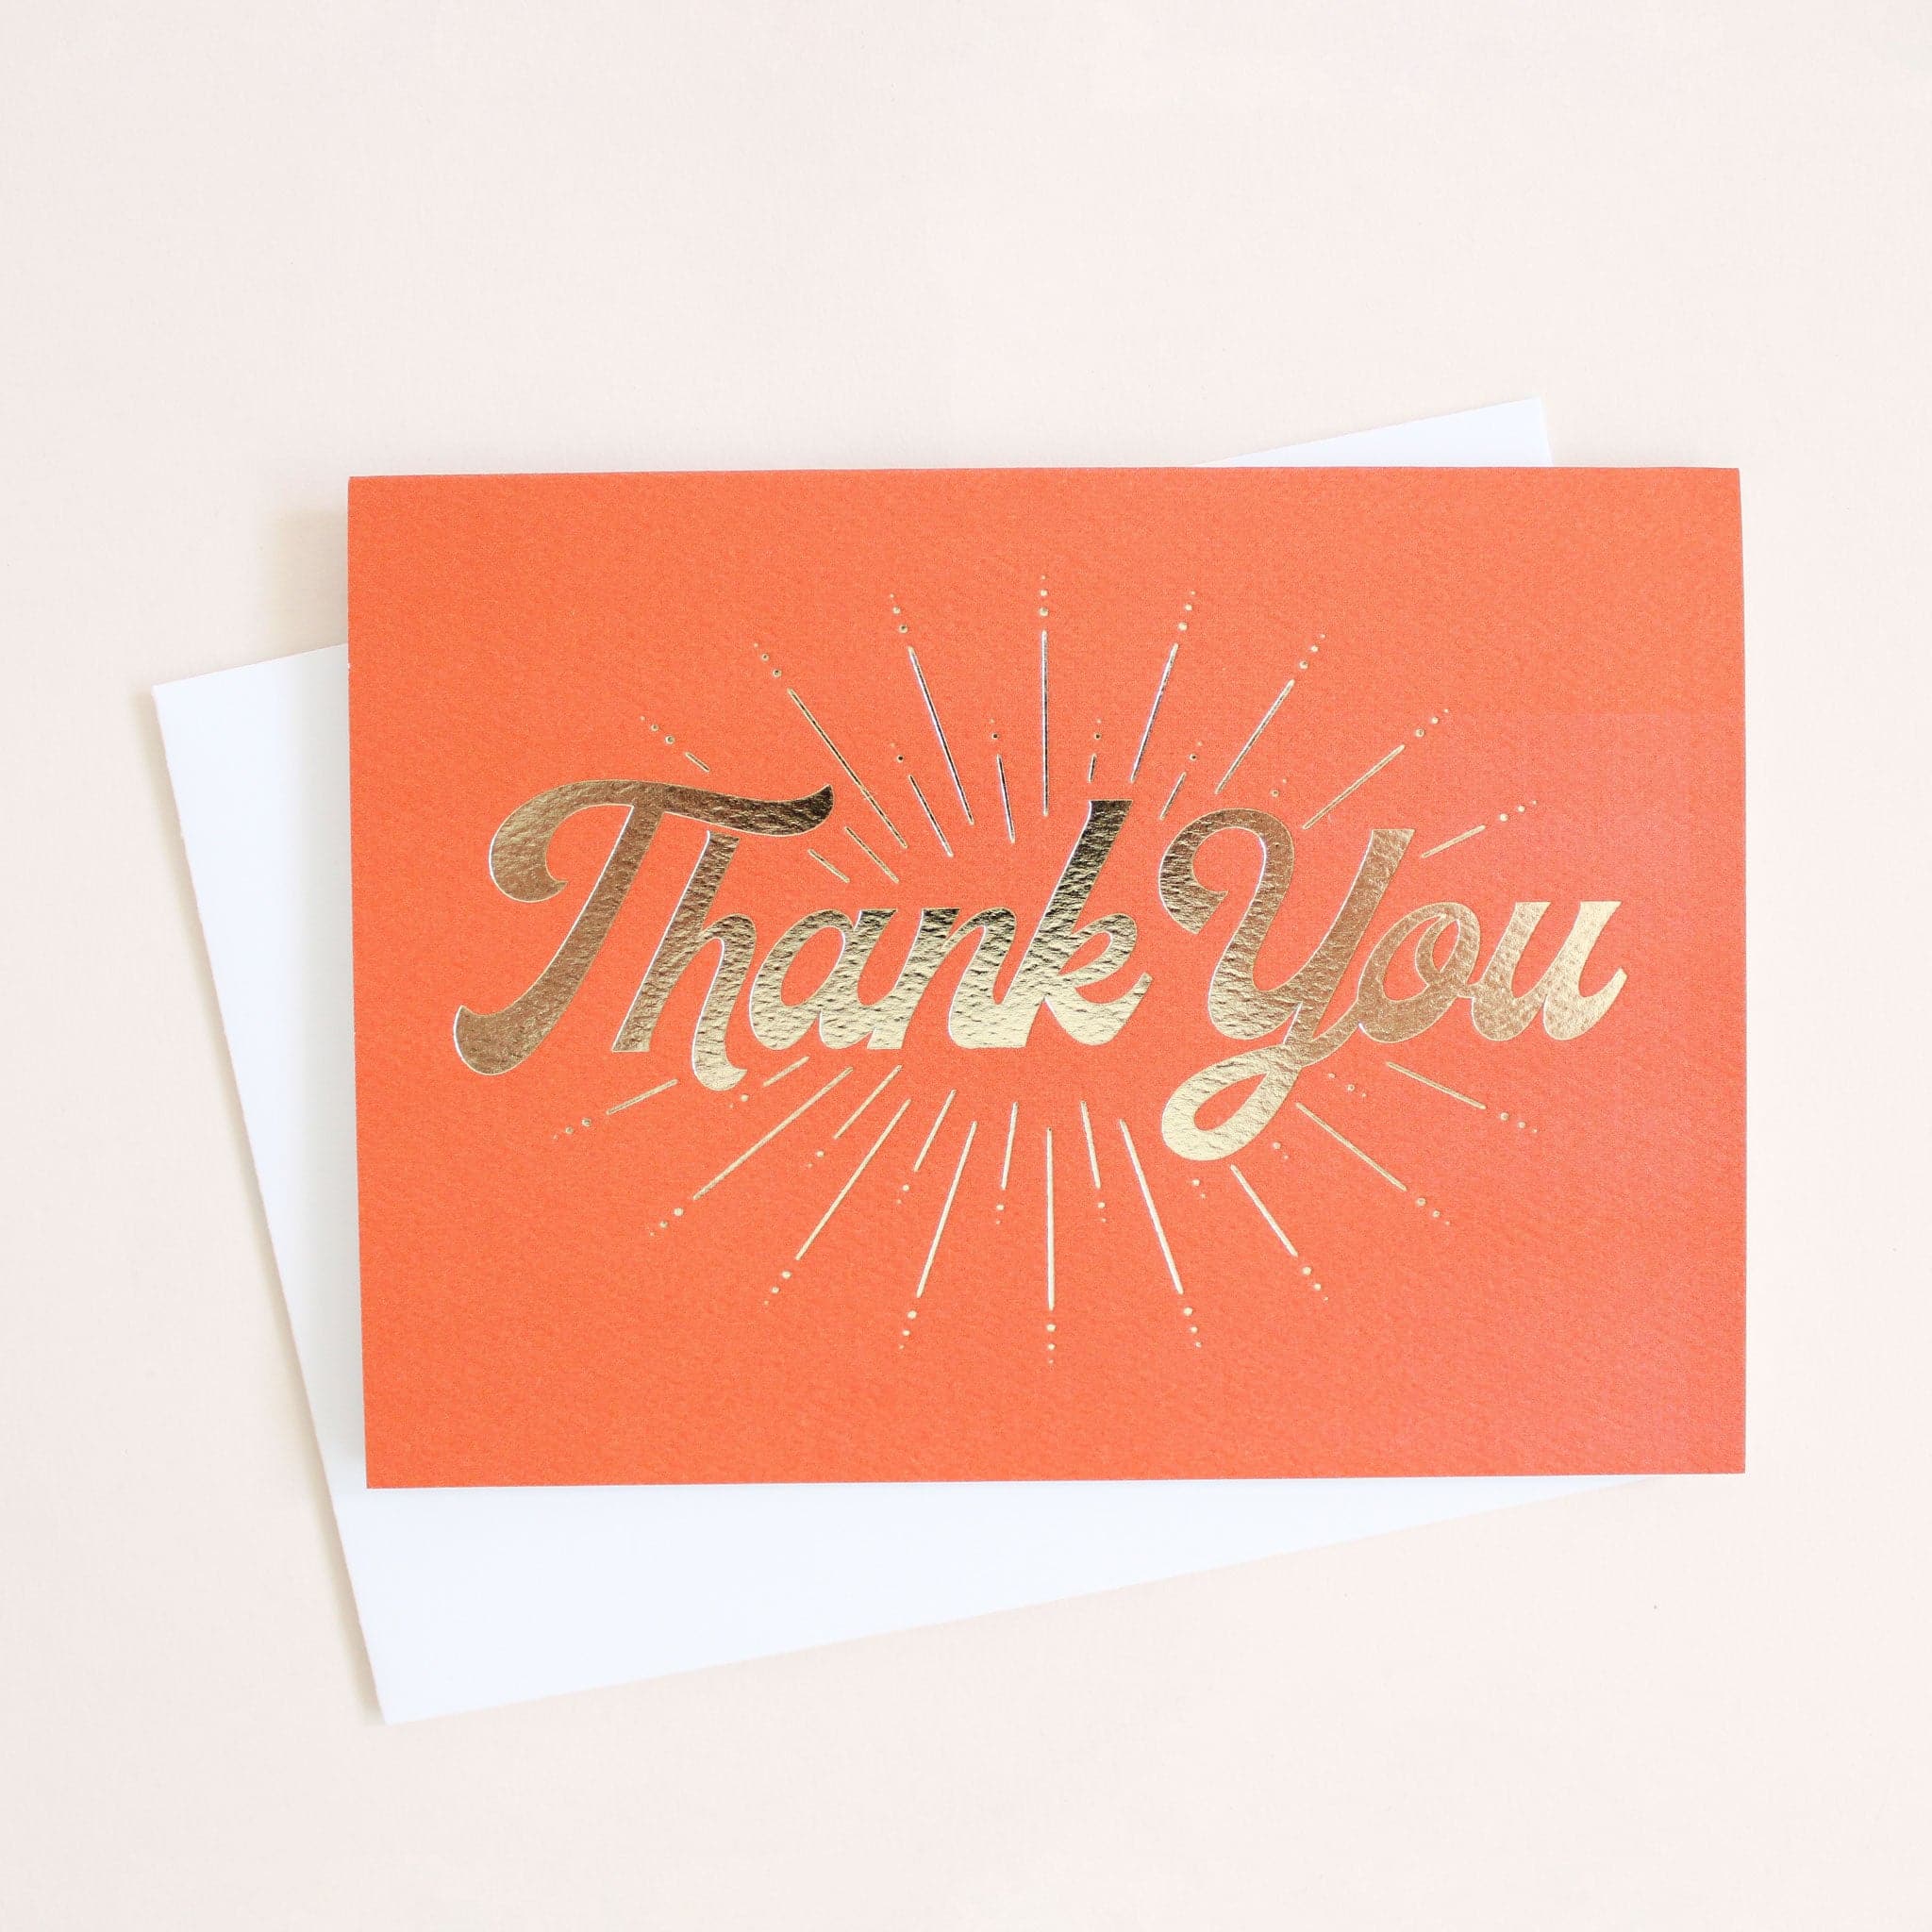 Tangerine orange card reading &#39;Thank You&#39; in gold foil. Gold foil sunburst design beams from the text. The card is accompanied by a solid white envelope